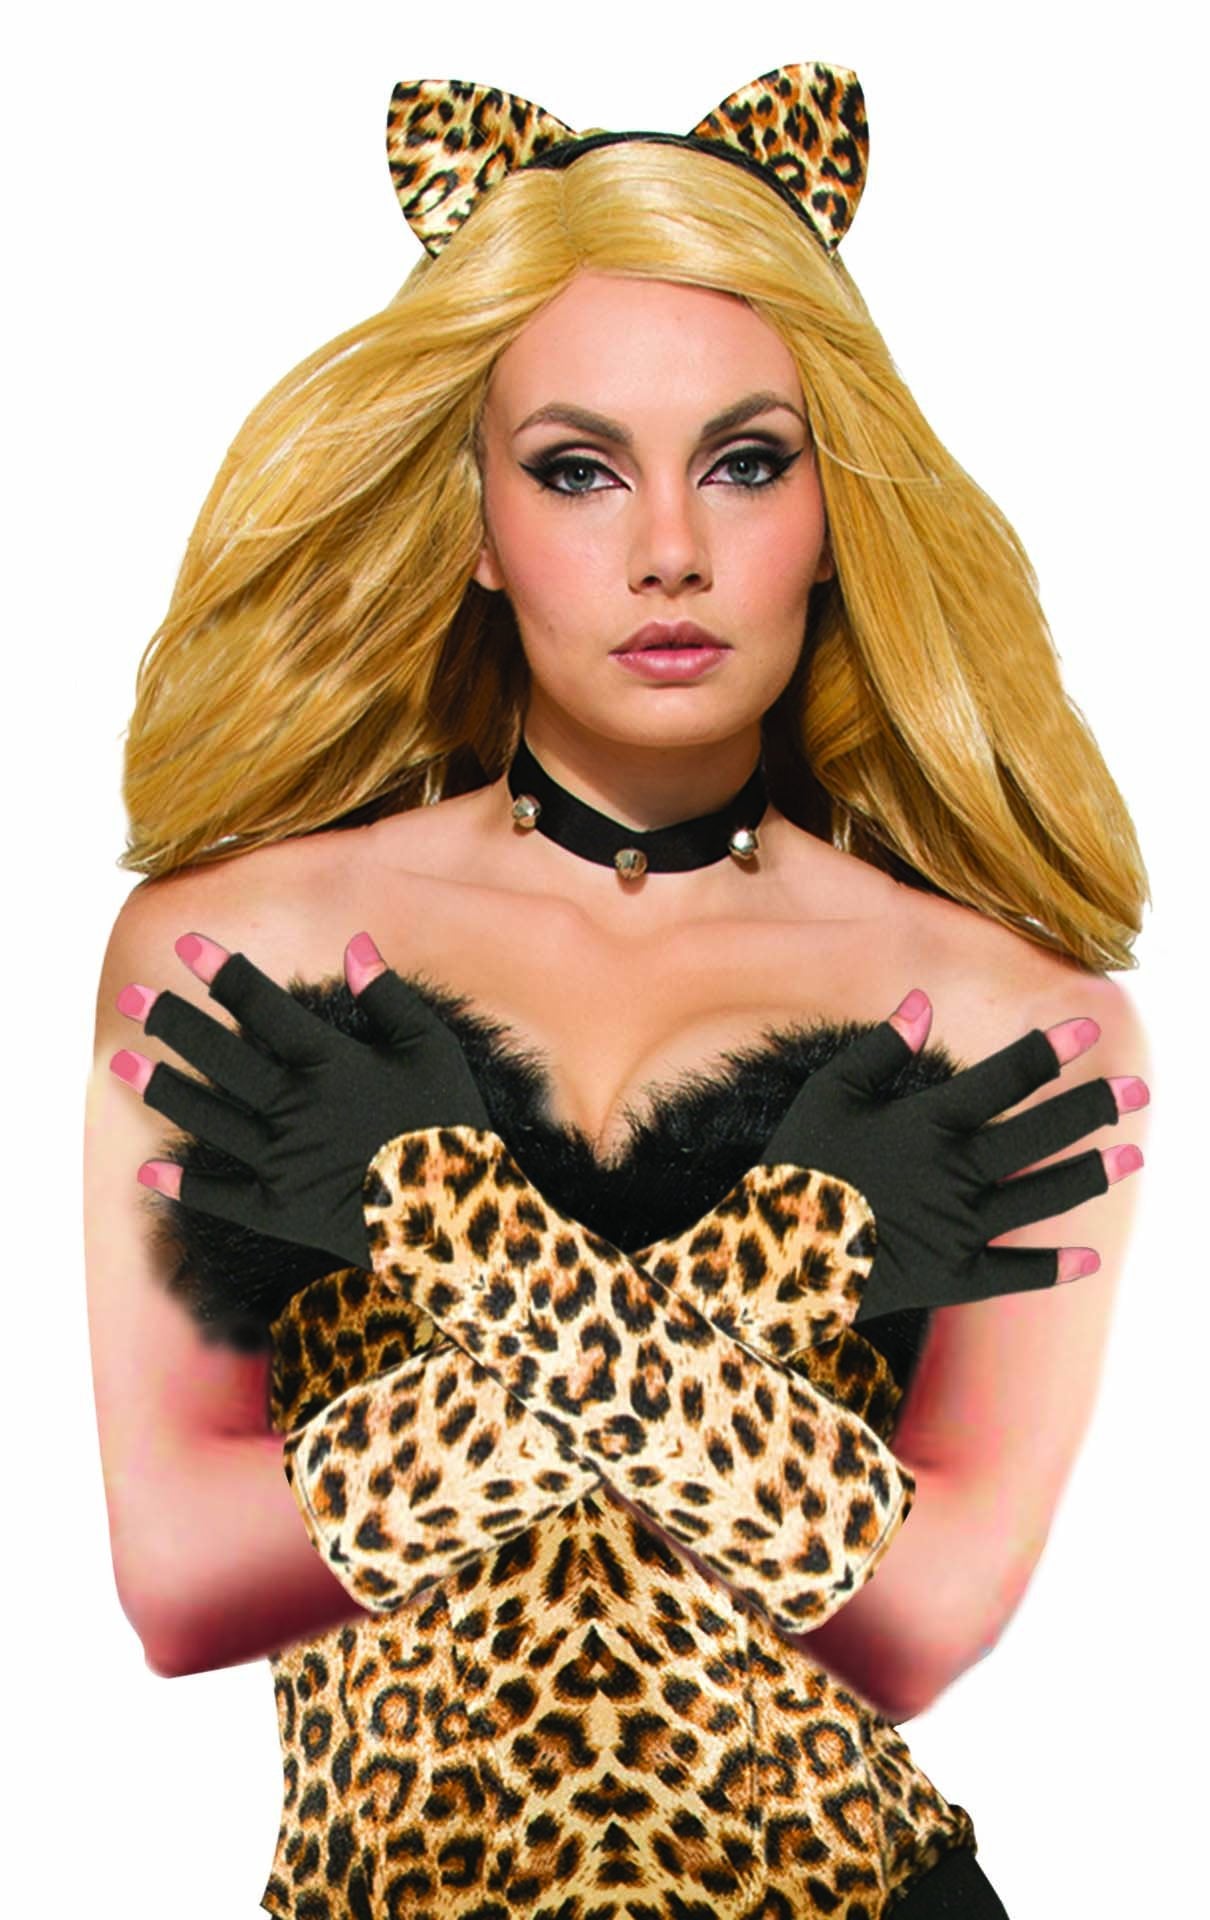 Soft nylon black hands with leopard print to elbow